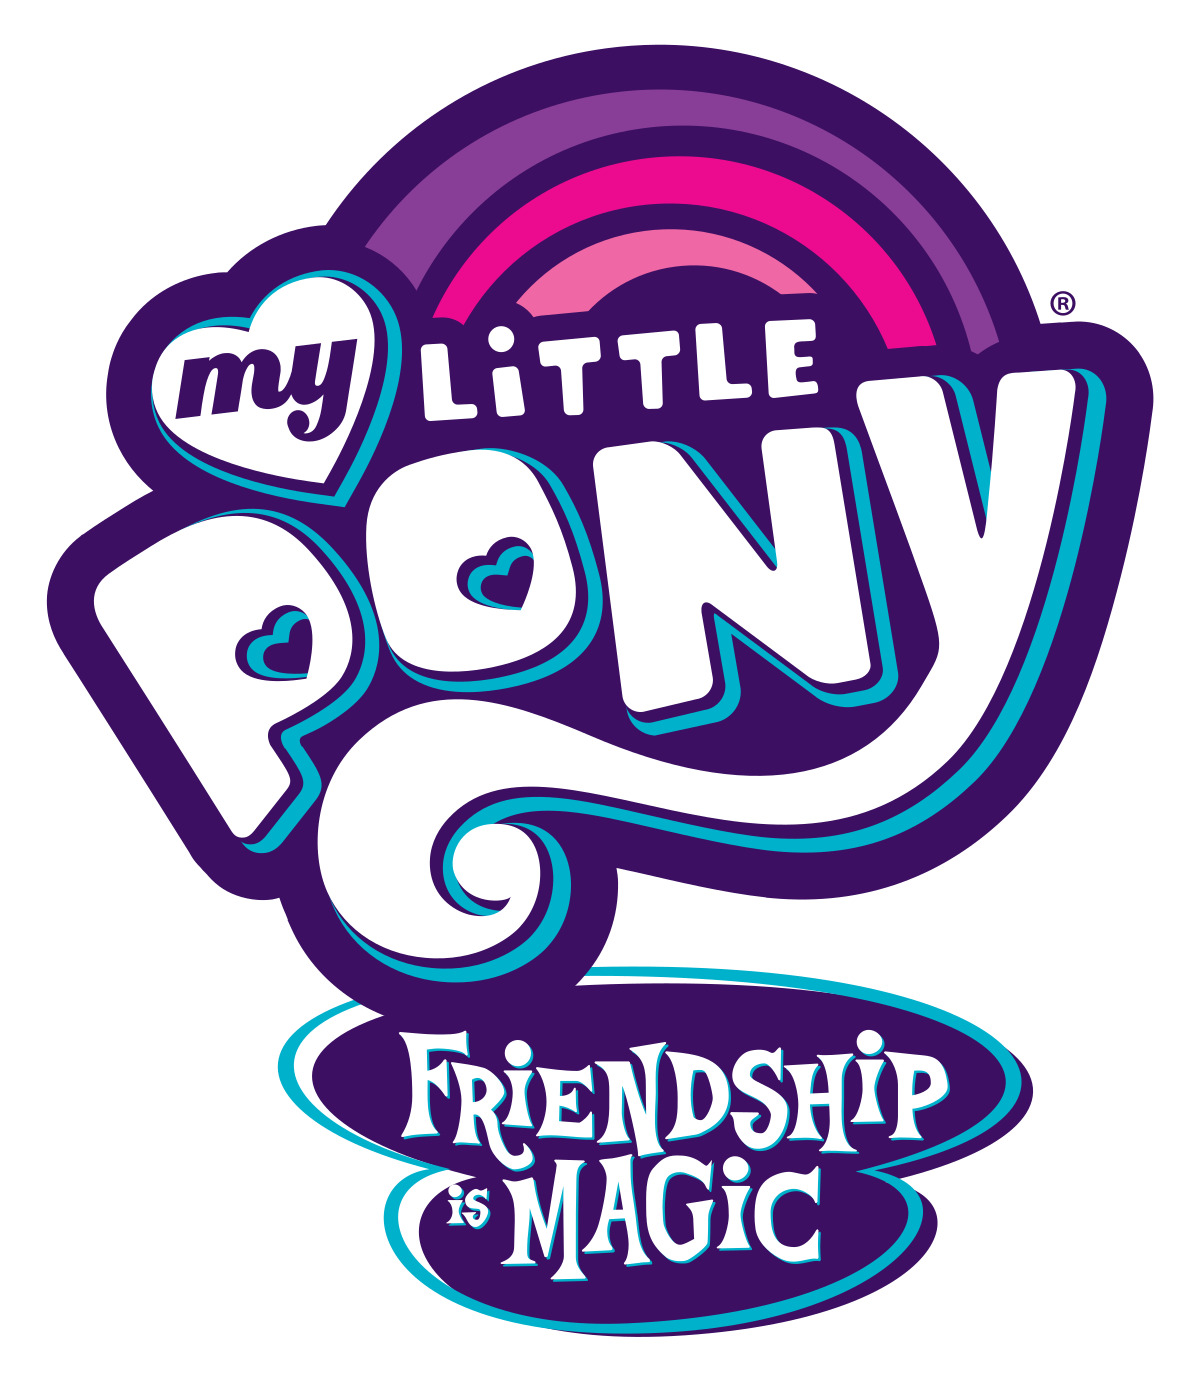 1200px-My_Little_Pony_Friendship_Is_Magic_logo_-_2017.svg.png